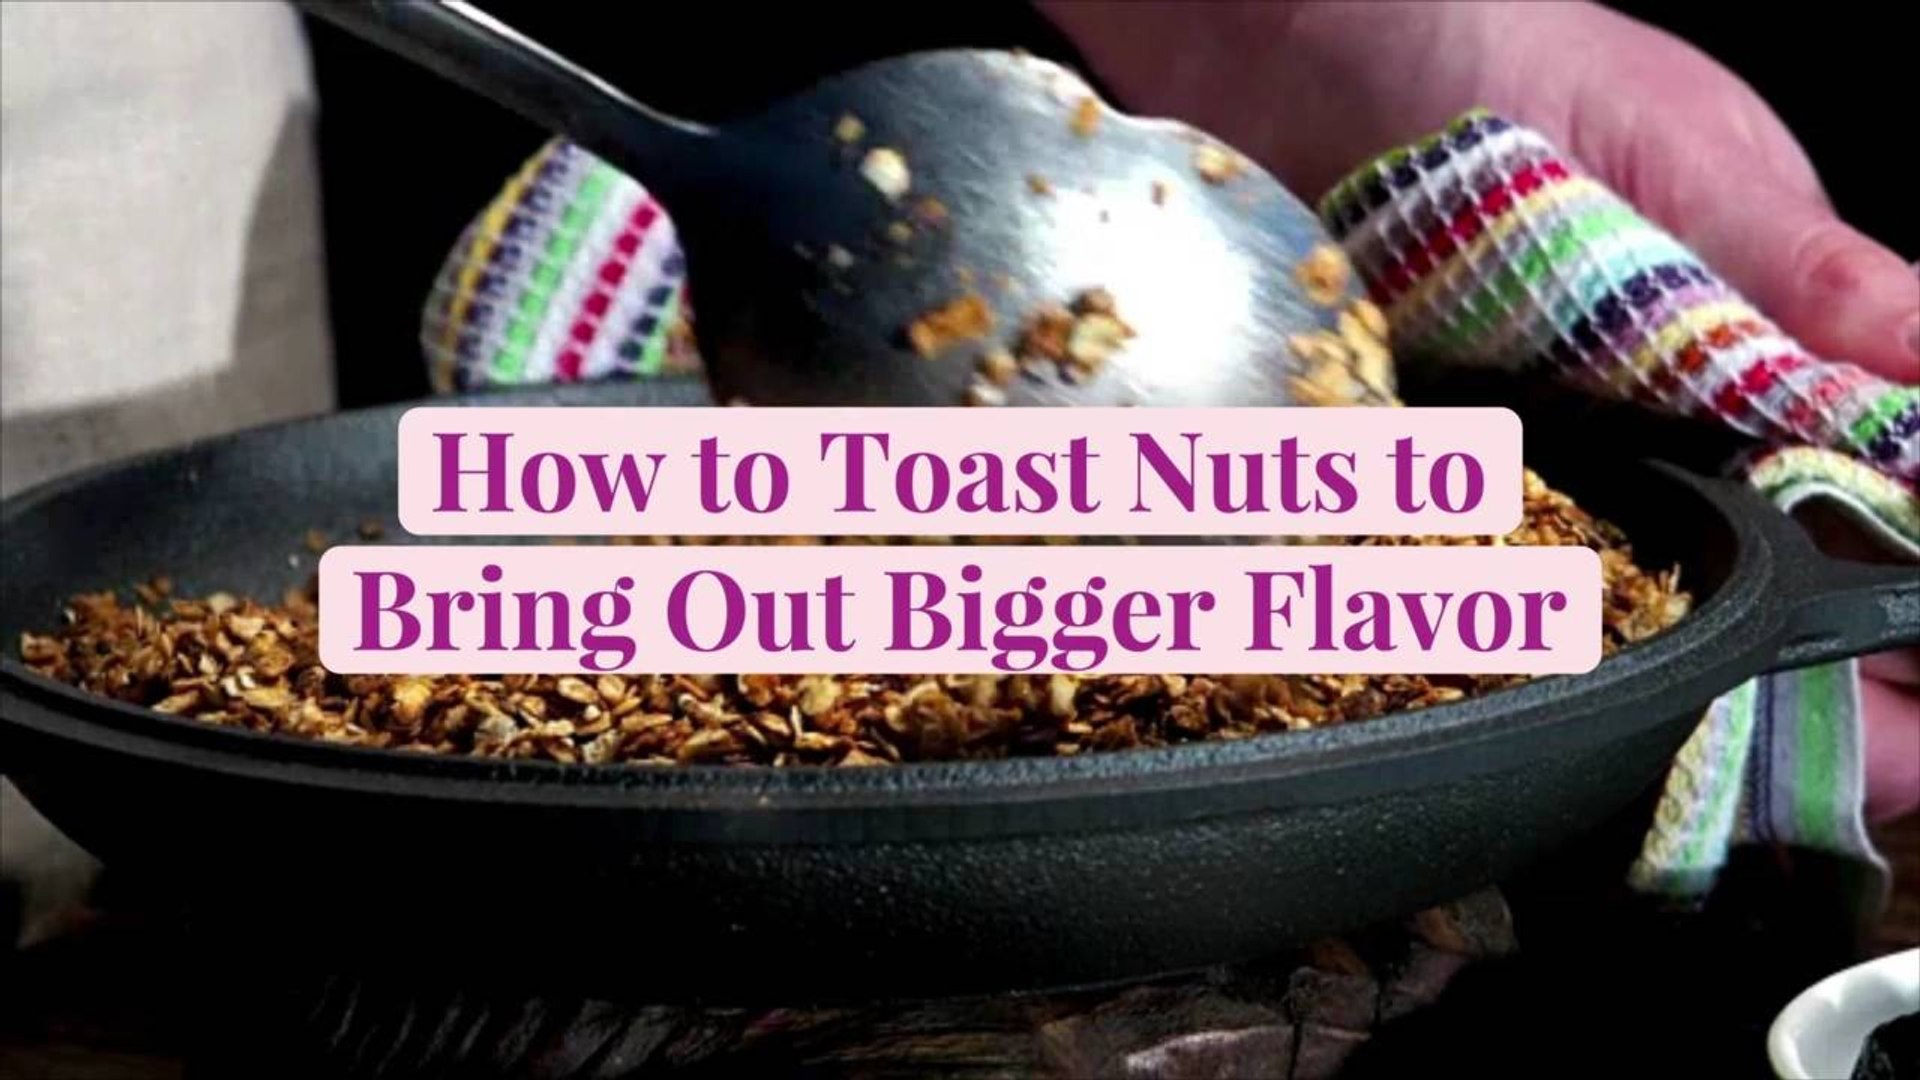 How to Toast Nuts to Bring Out Bigger Flavor - video Dailymotion